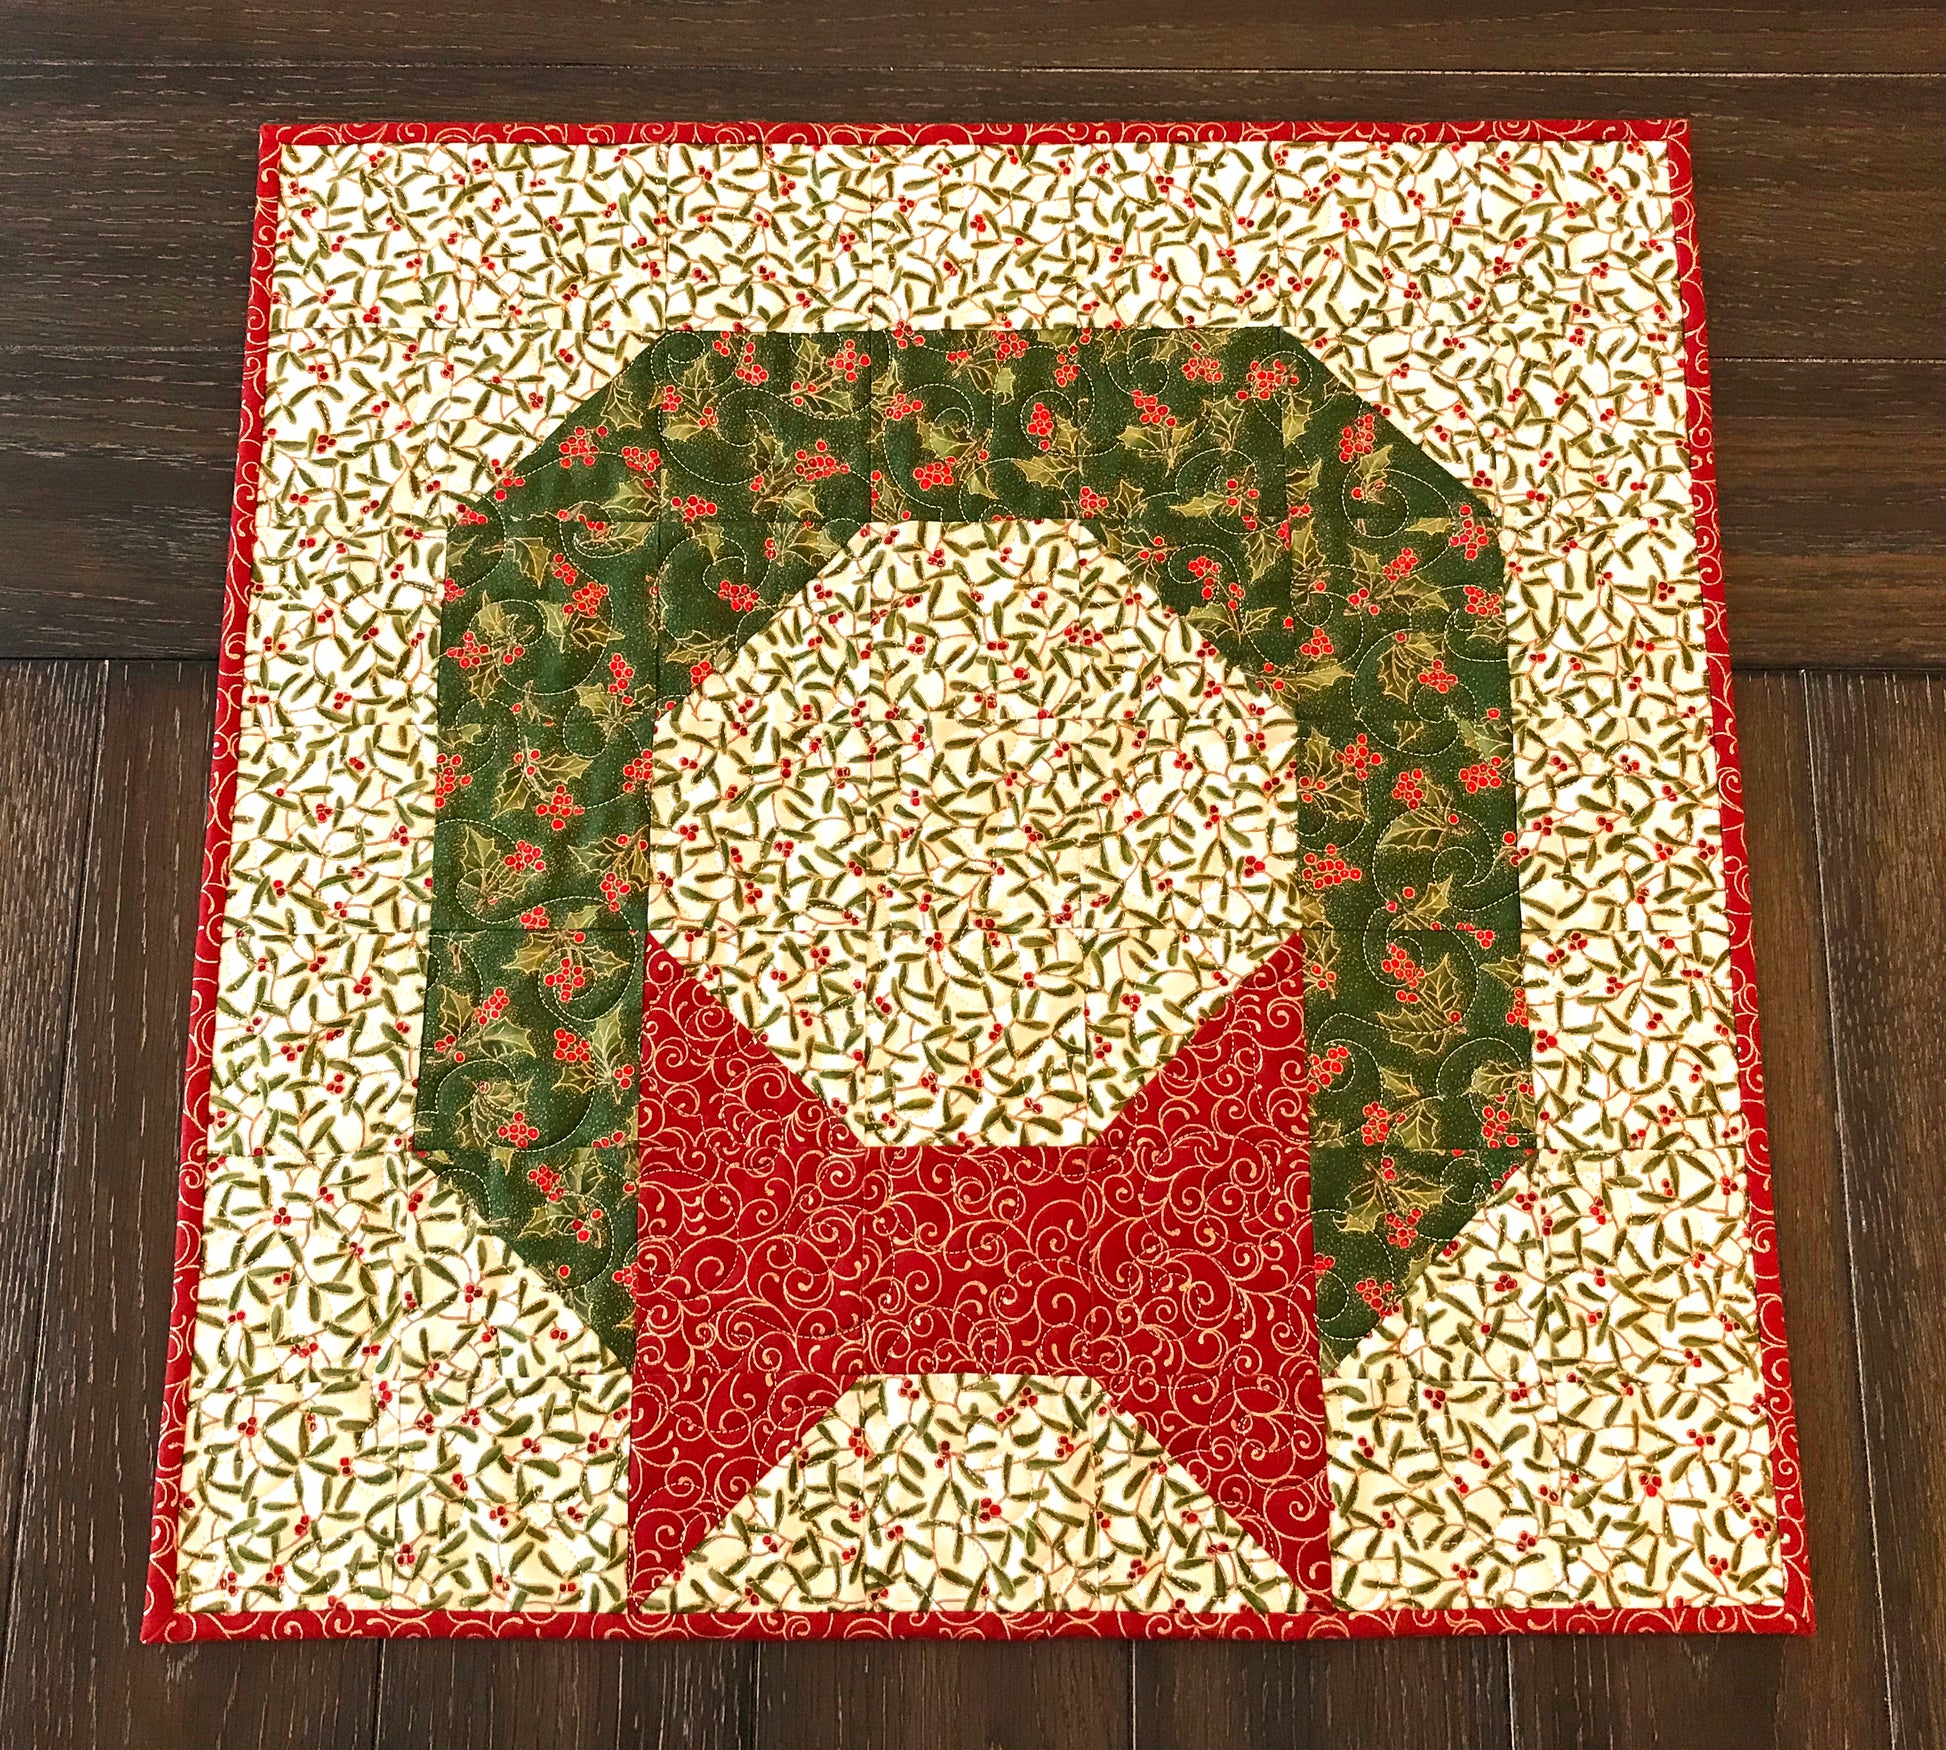 Christmas Wreath Table Topper - Handmade Quilts, Digital Patterns, and Home Décor items online - Cuddle Cat Quiltworks